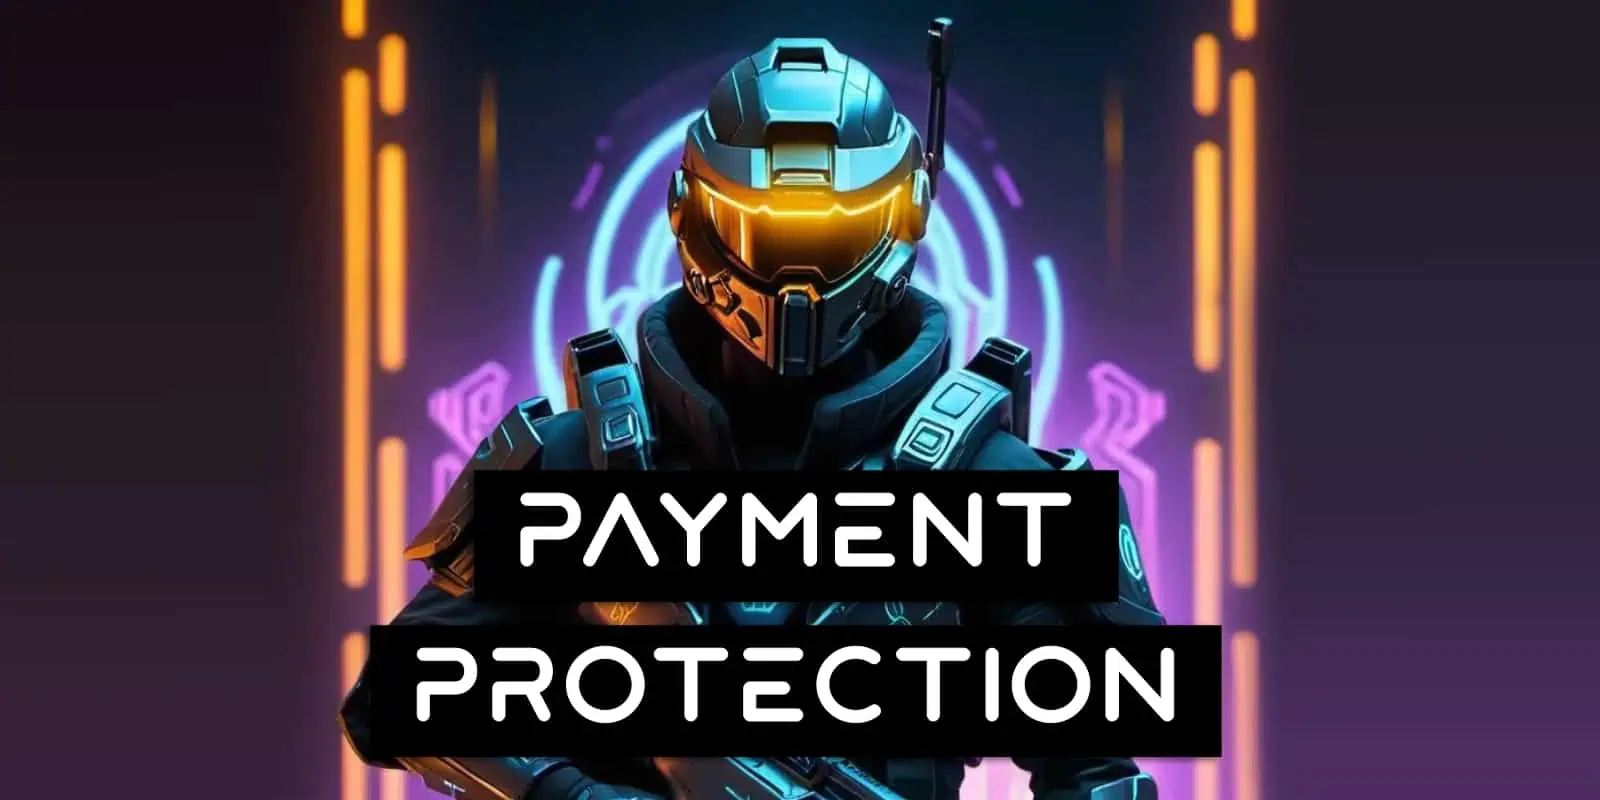 Payment Protection